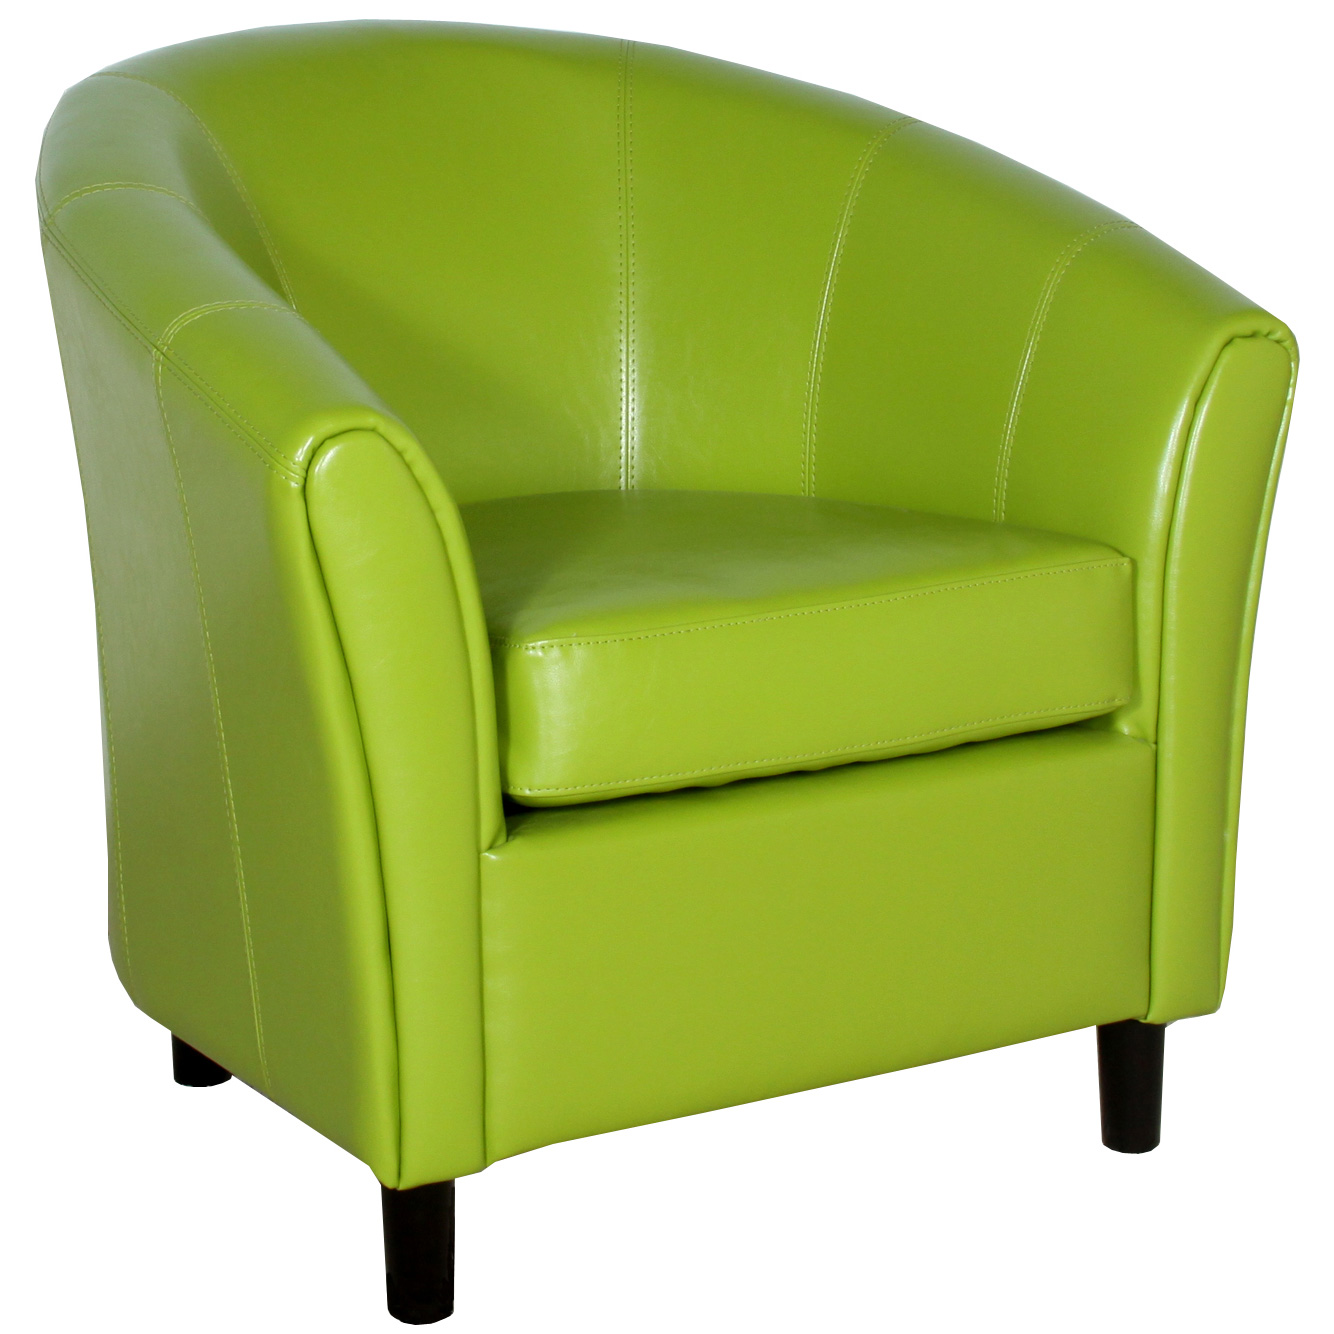 Napoli Lime Green Leather Chair